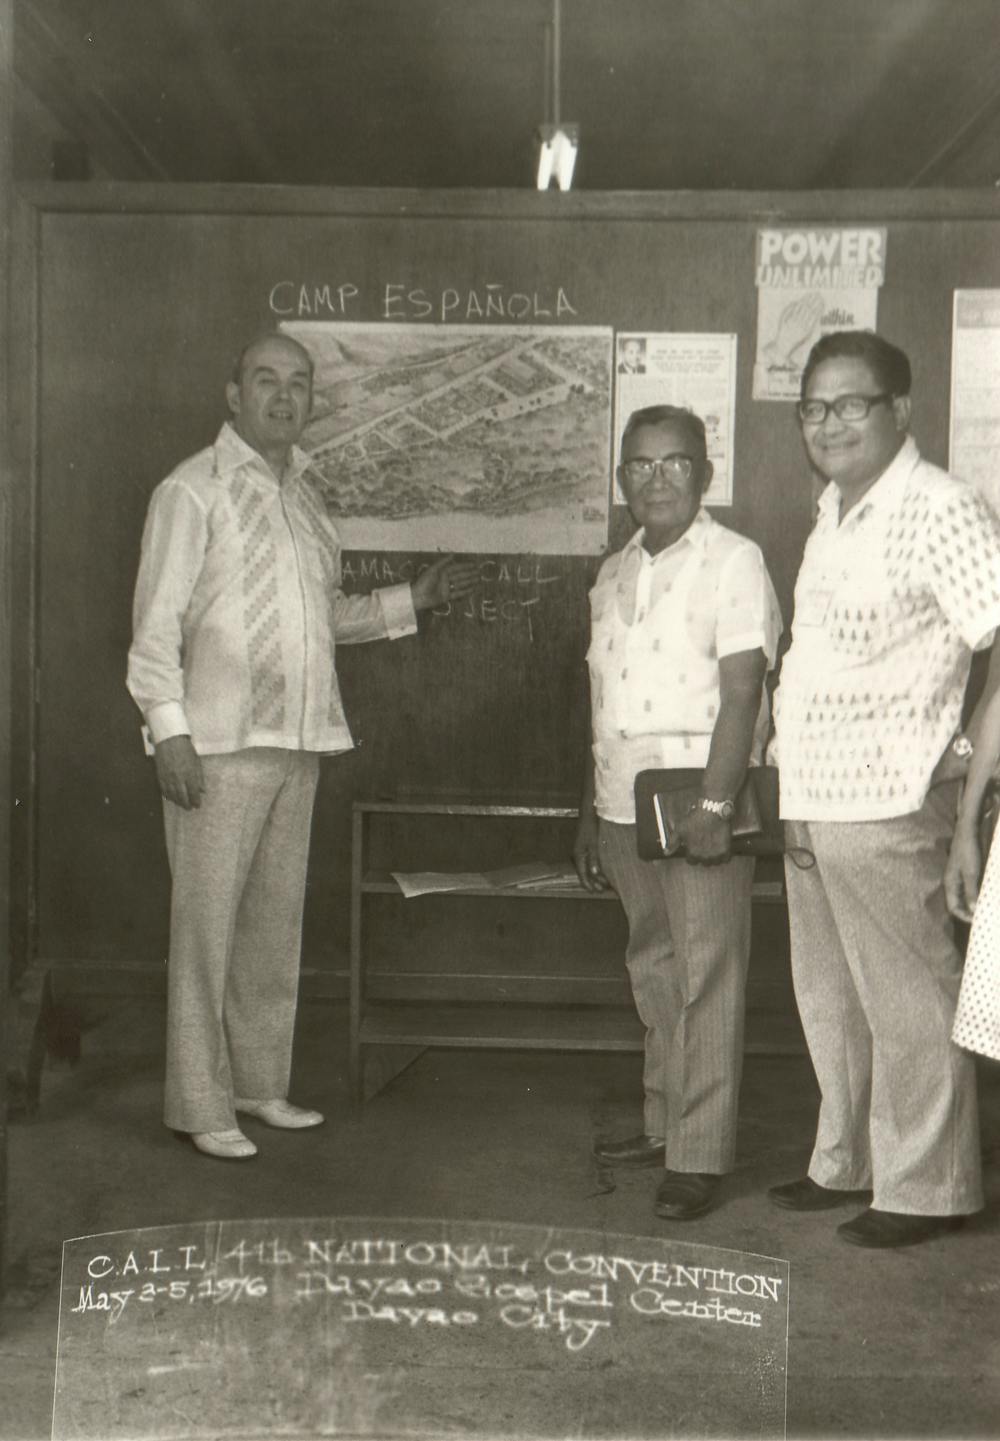 Stanley and two men in front of a black board and a diagram labeled "Camp Española"